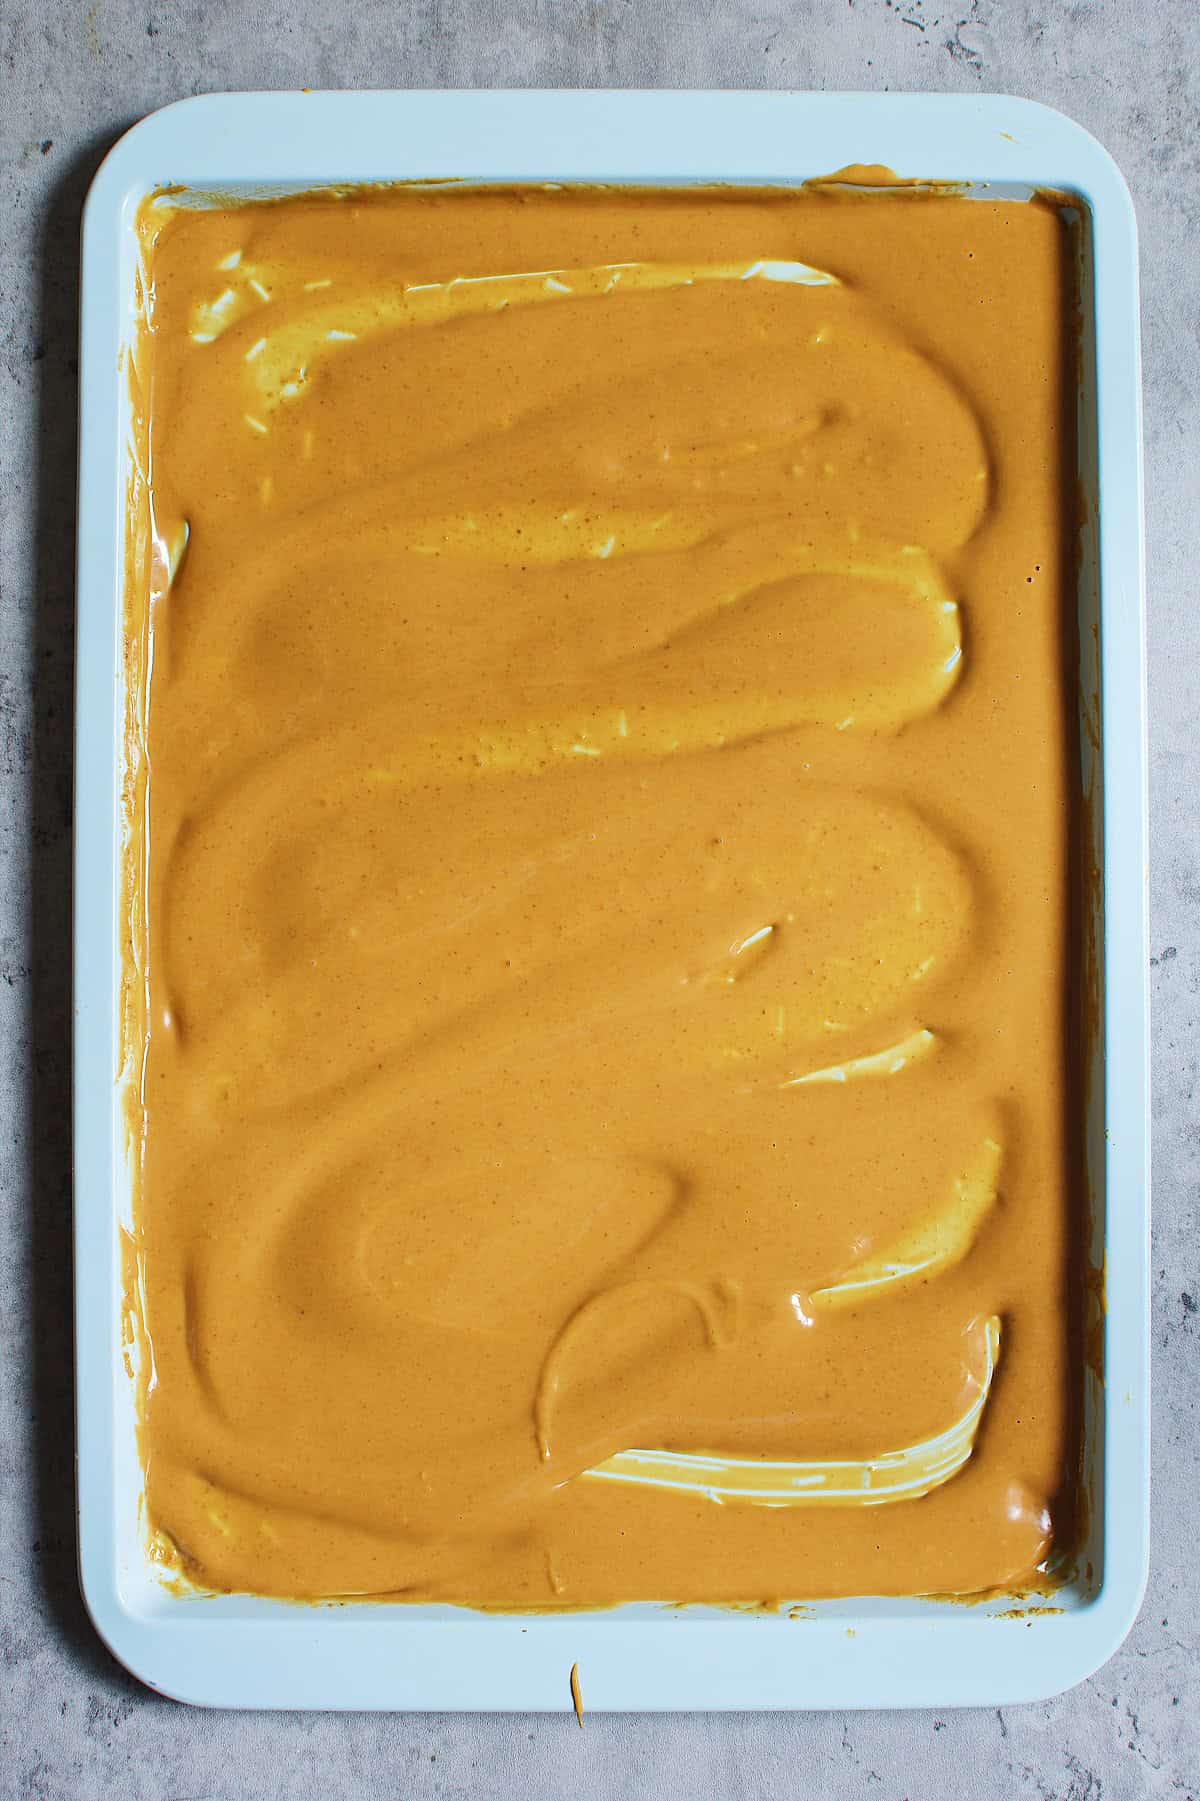 Melted blond chocolate in a baking tray.